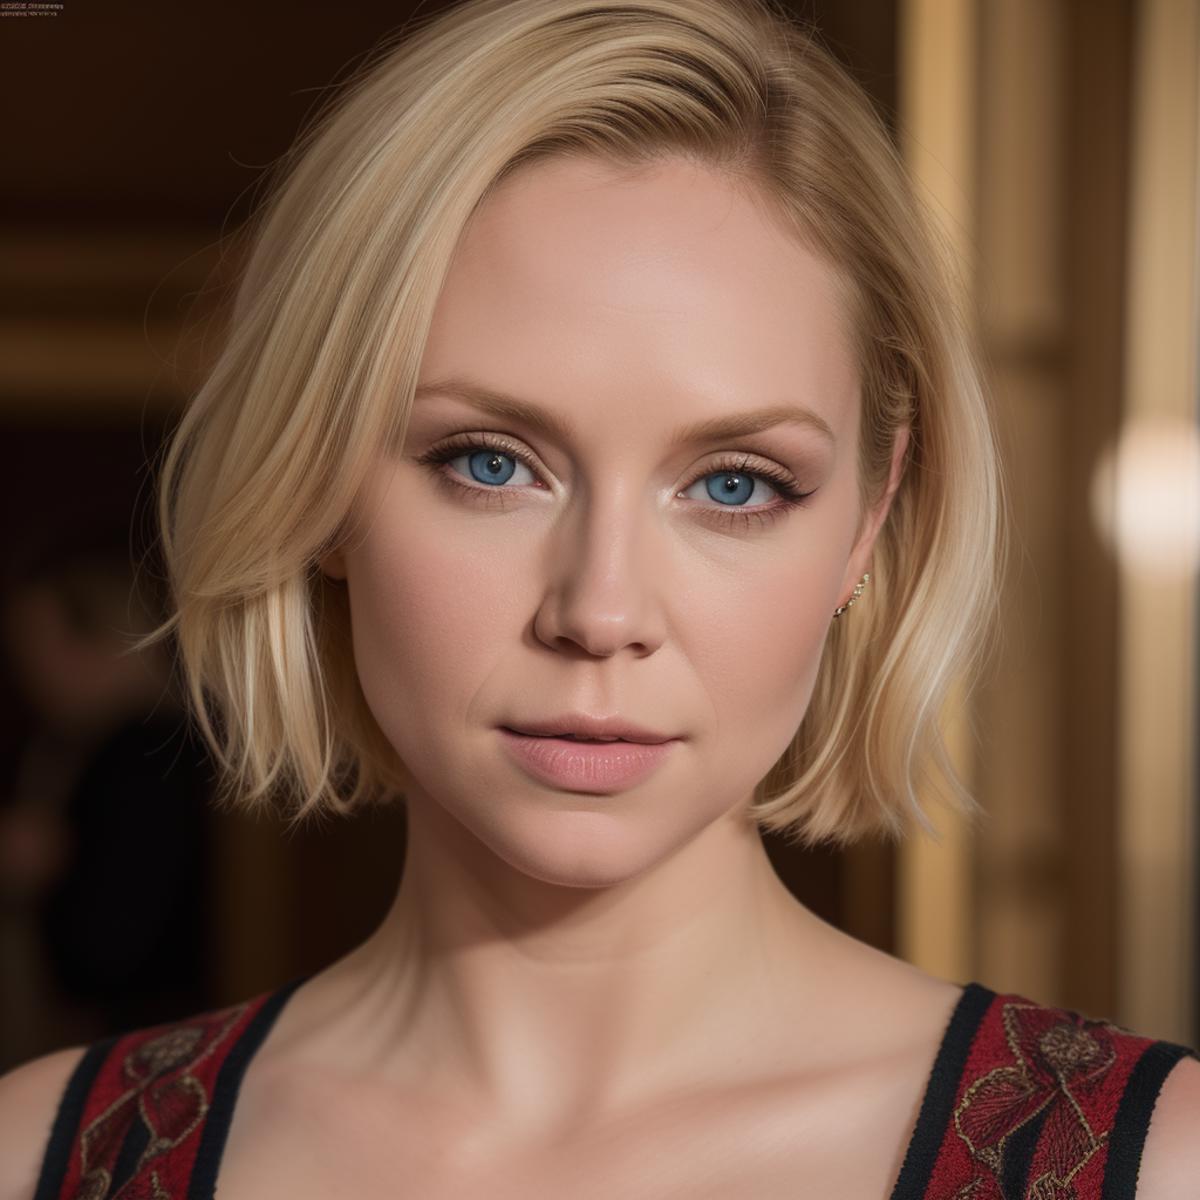 Gwendoline Christie image by infamous__fish